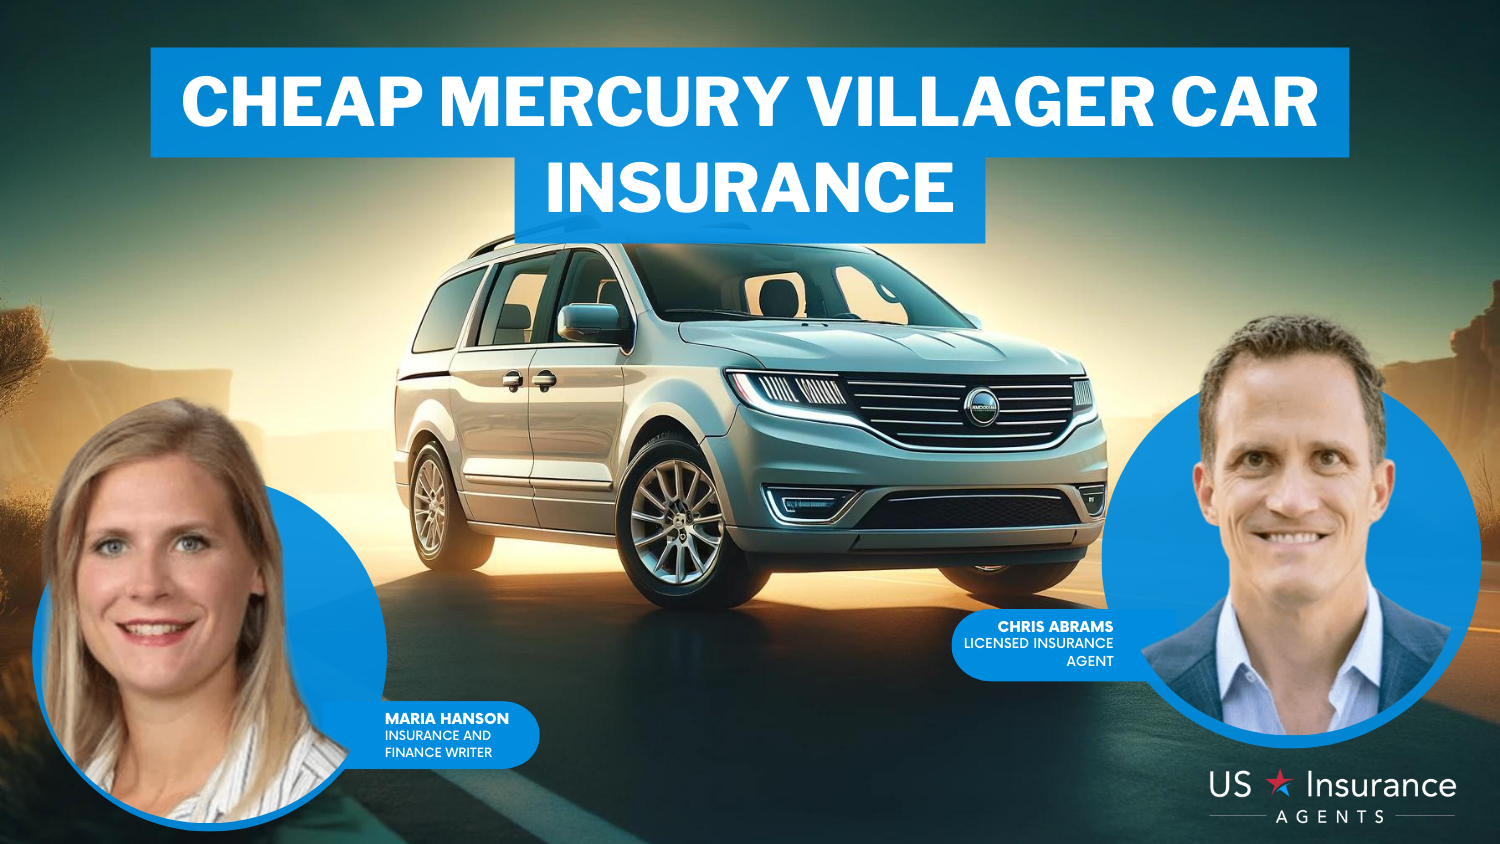 Cheap Mercury Villager Car Insurance: Erie, Safeco, and AAA